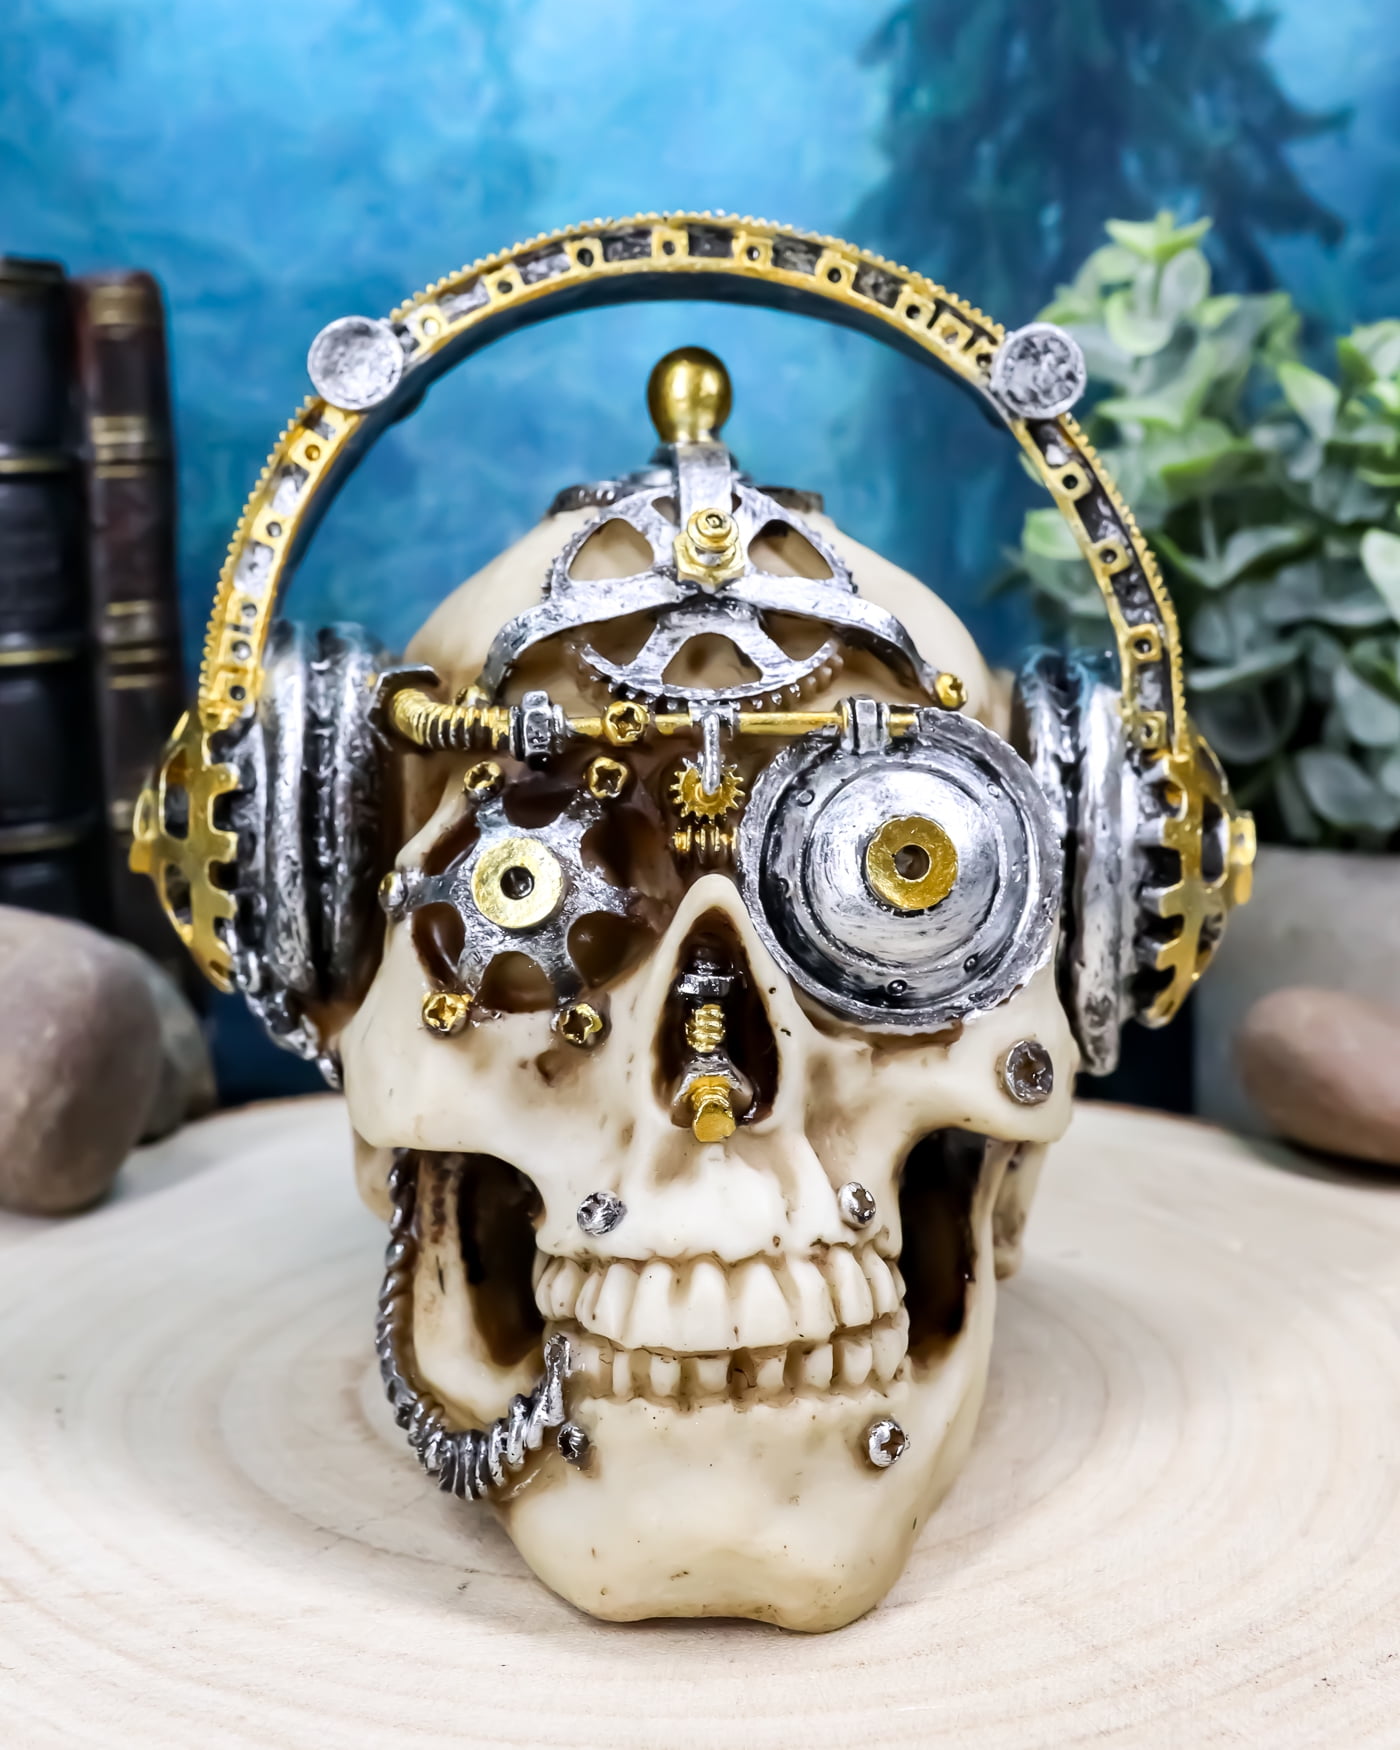 Highly Detailed RARE Skull Statue/Ornament/Figure STEAMPUNK Occult/Supernatural 